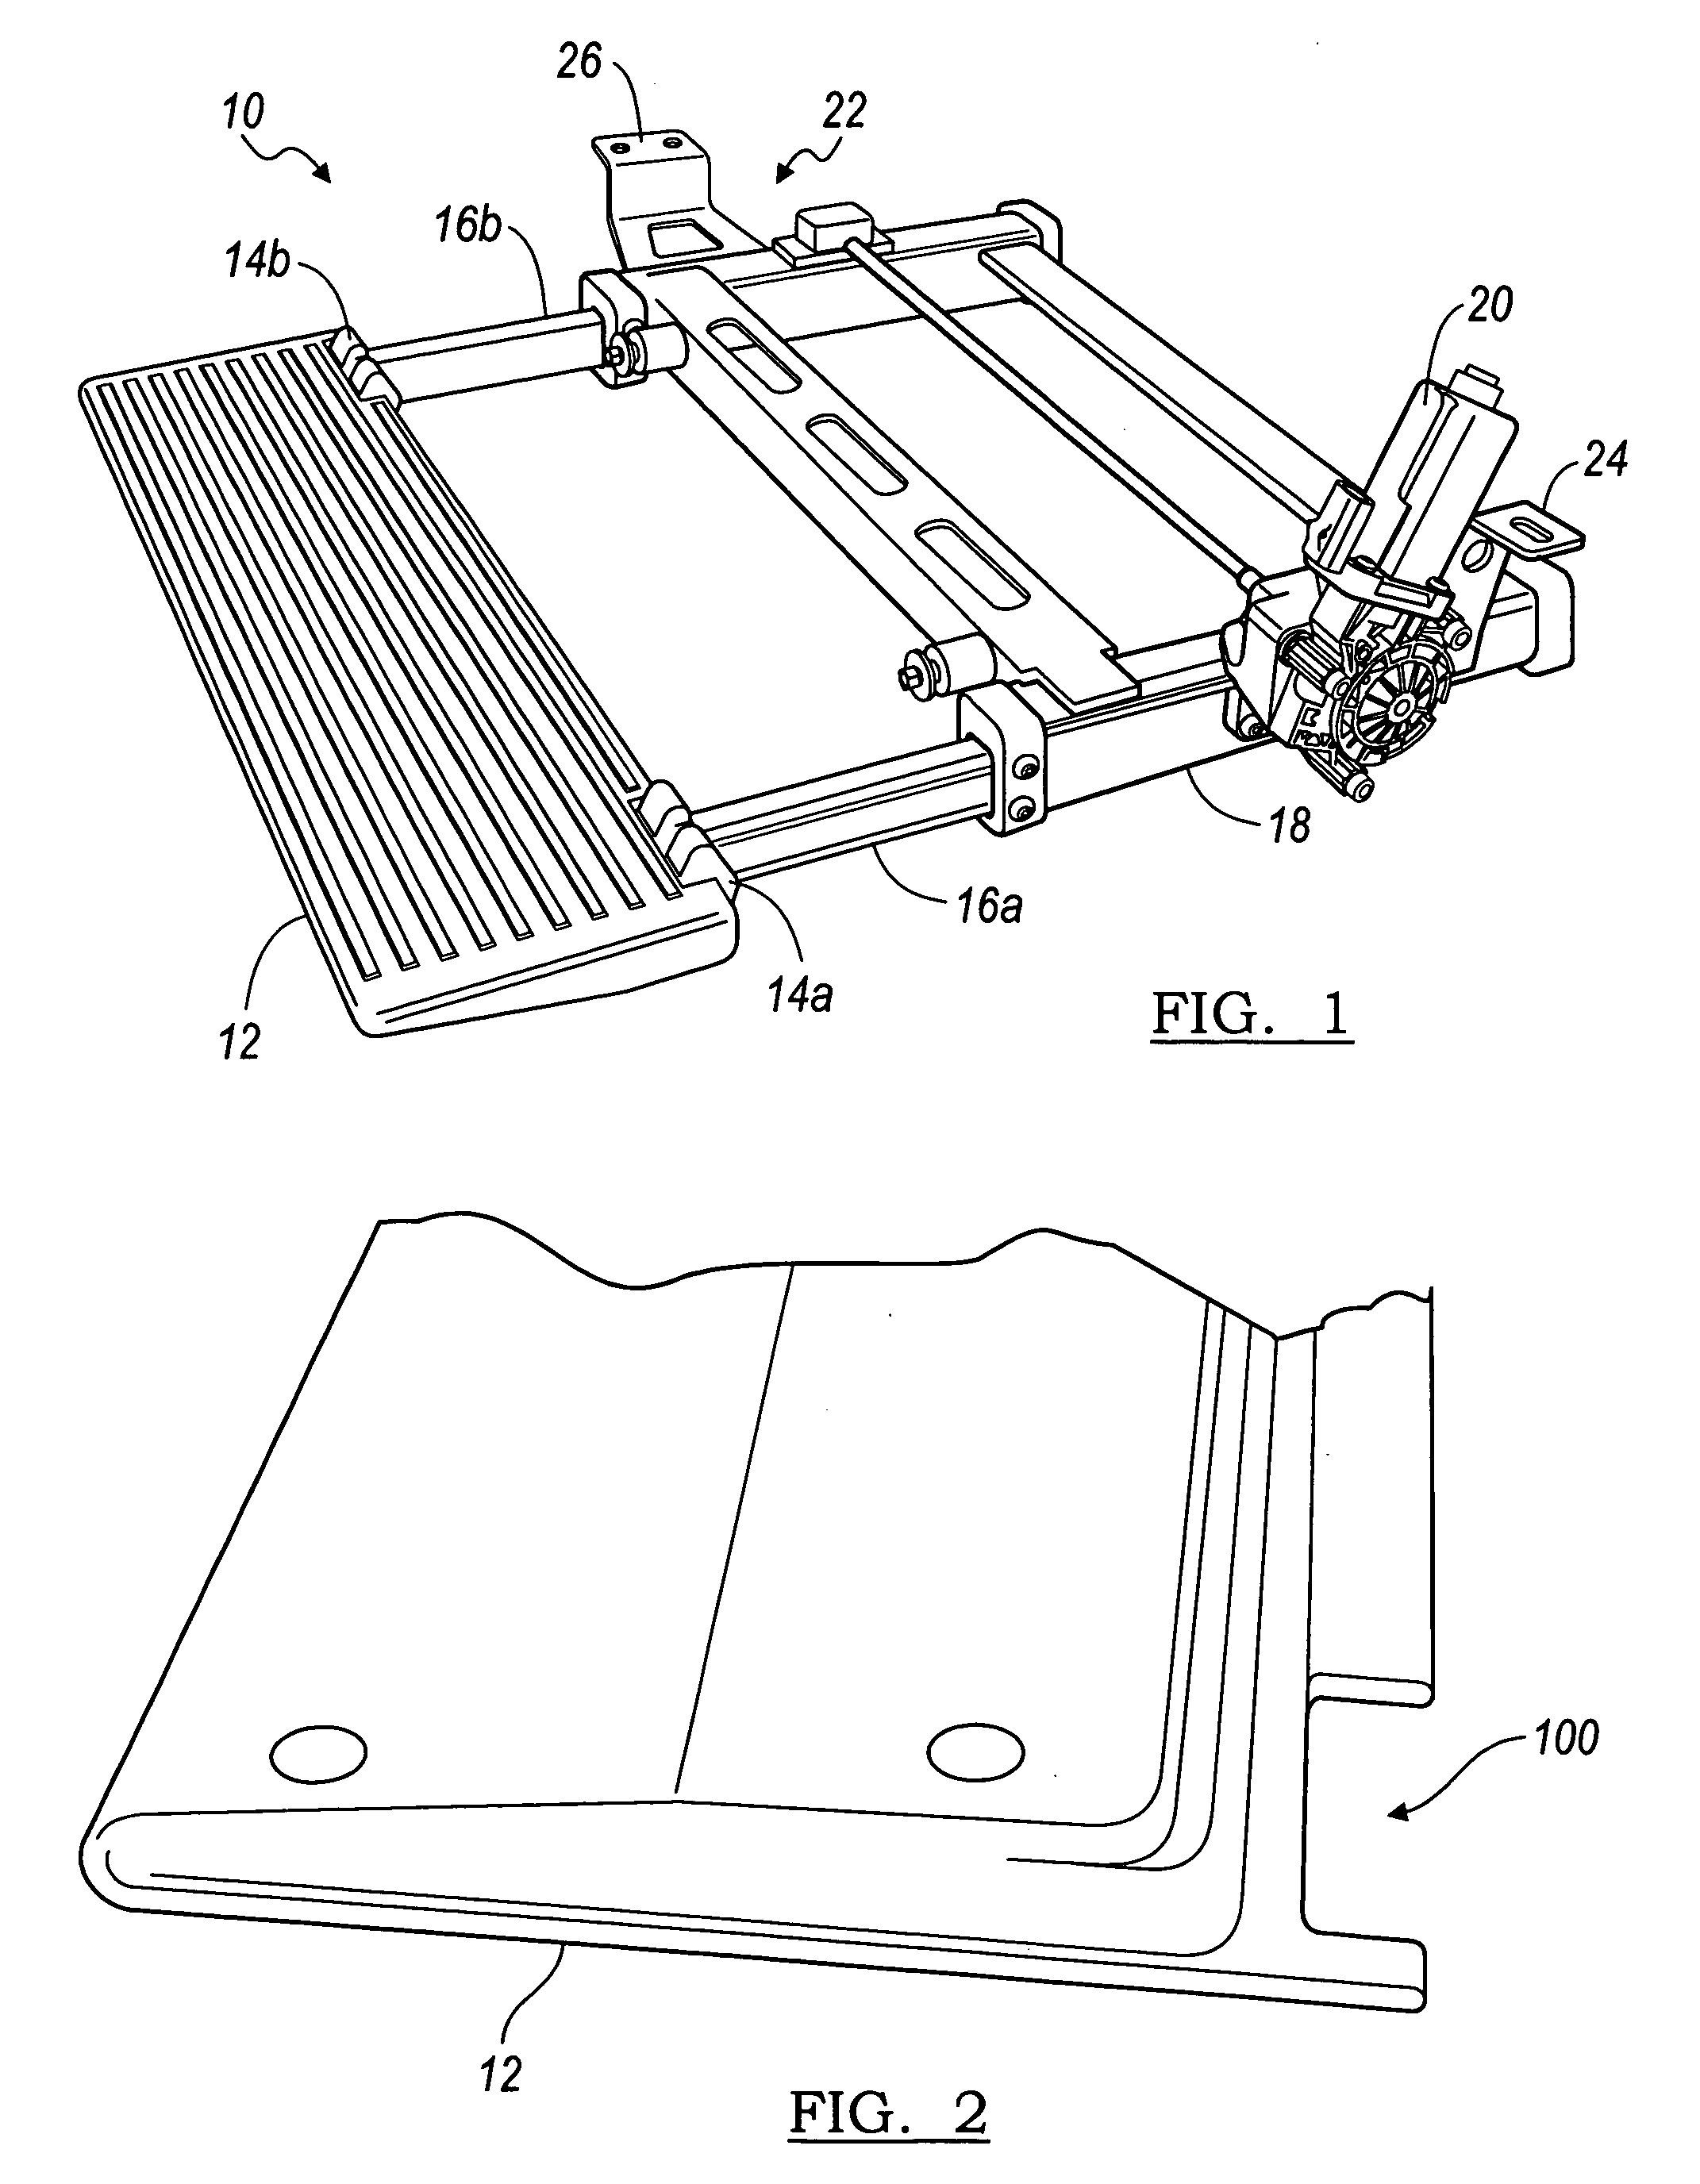 Automated deployable running board